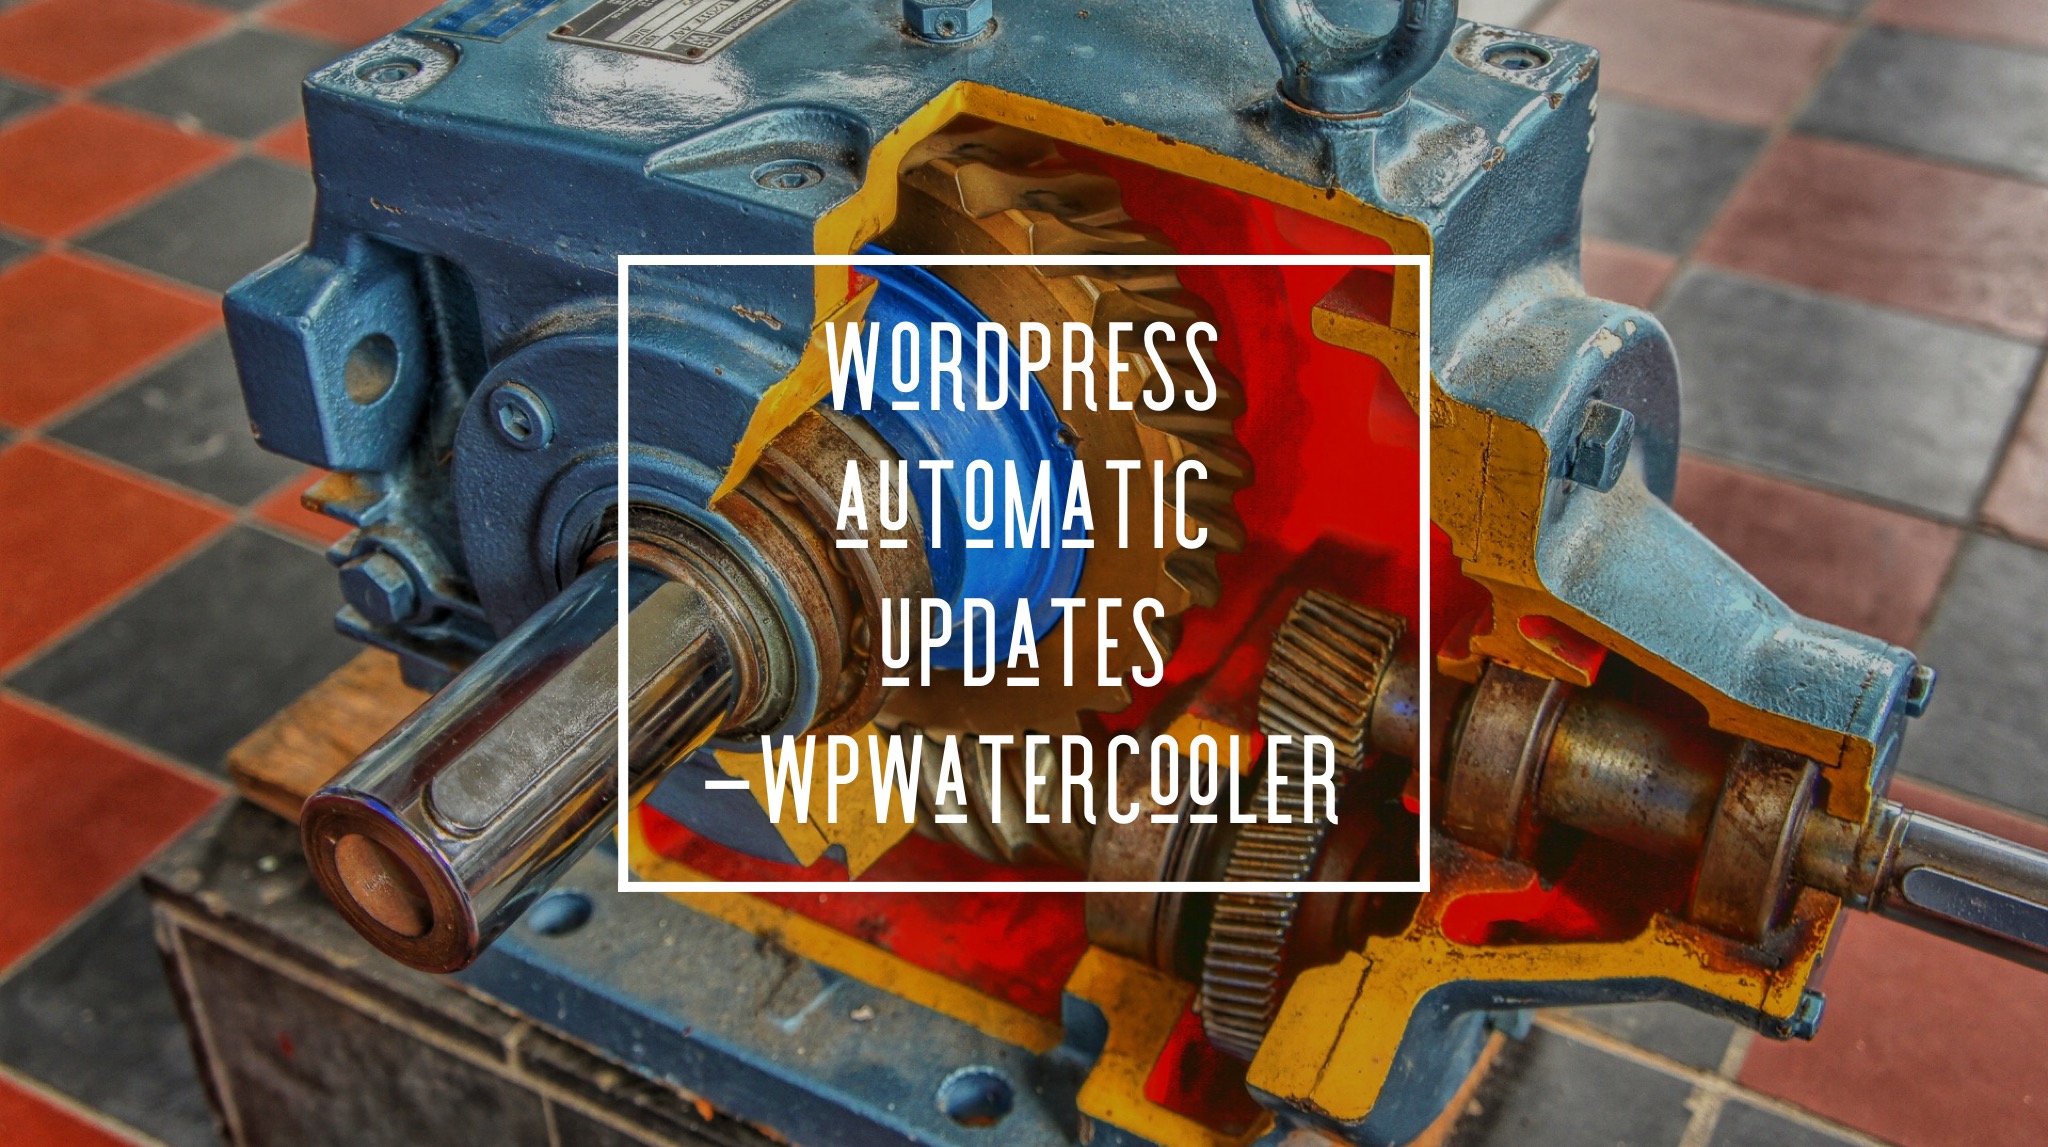 EP311 – WordPress Automatic Updates – Plugins, Themes, and PHP versions!